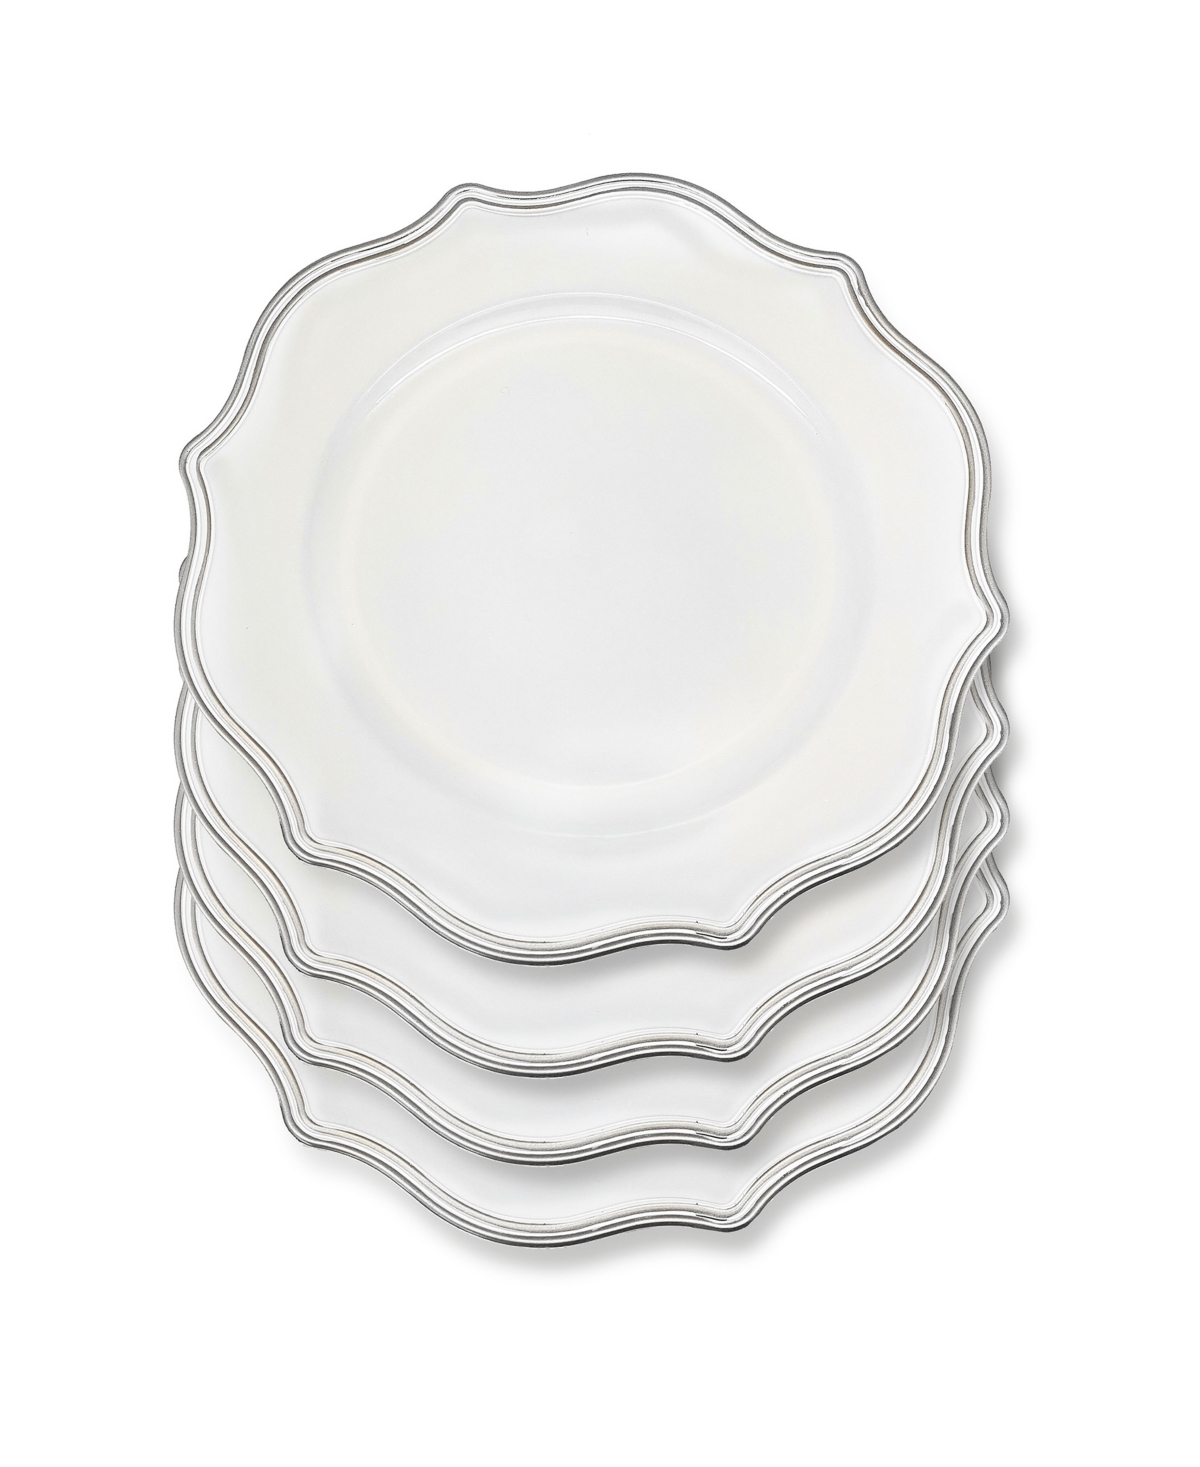 American Atelier Lacey Charger Plates 13" Set, 4 Pieces In White